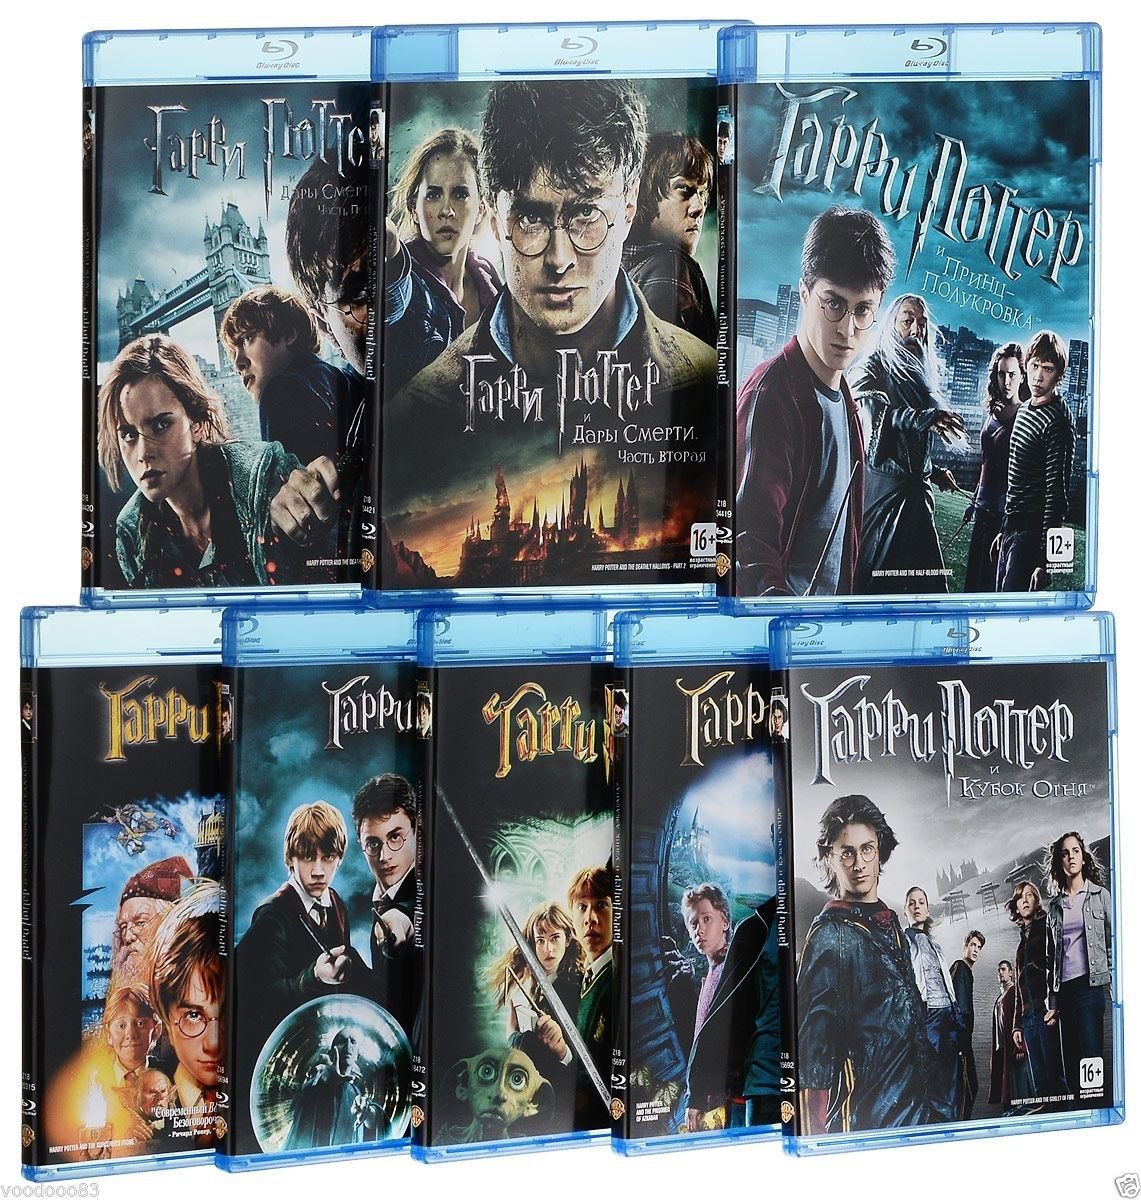 harry potter 8 film collection